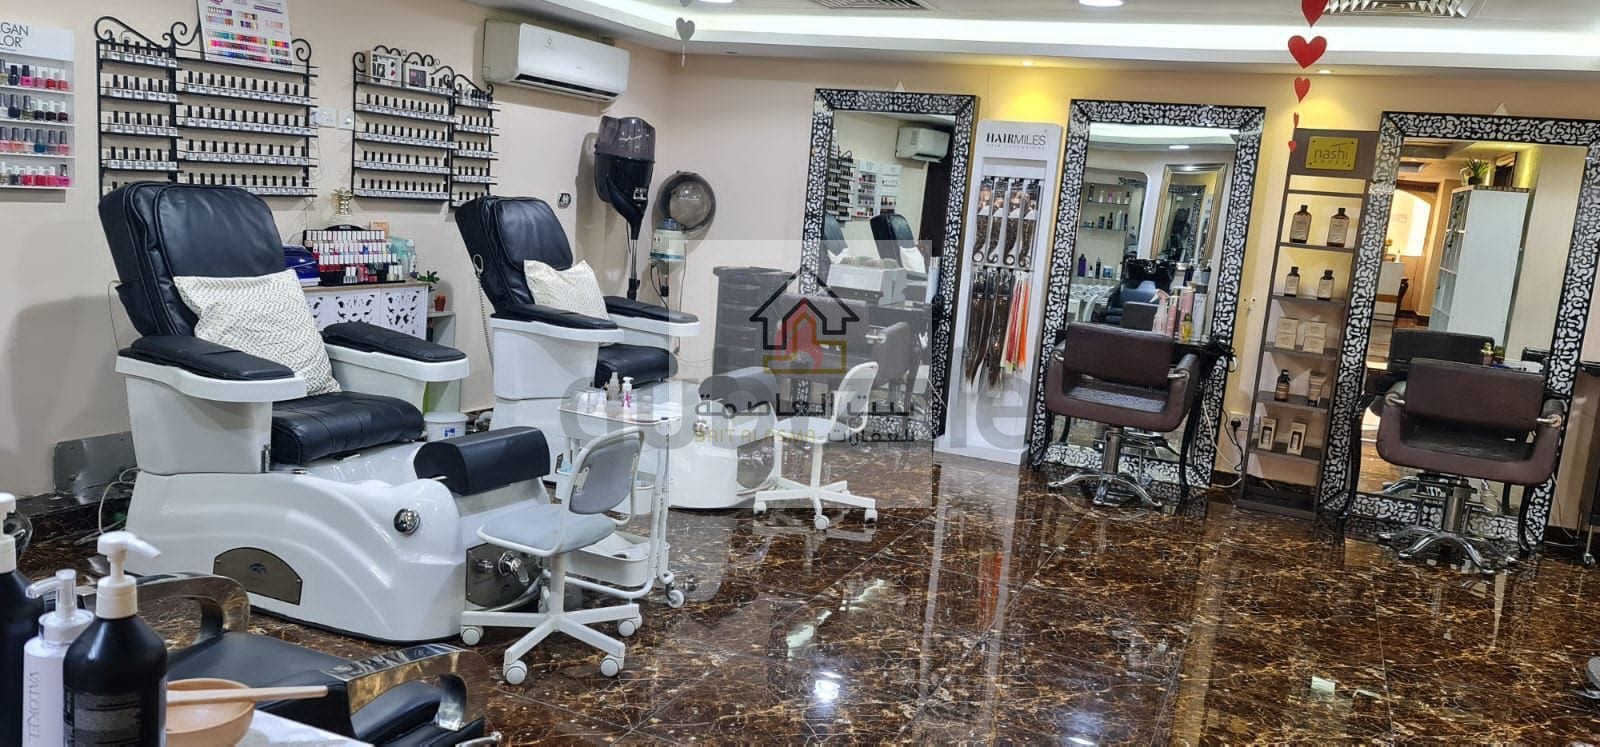 Amazing Ladies Saloon Fully Furnished And New With Luxury Features Available For Sale Located In A